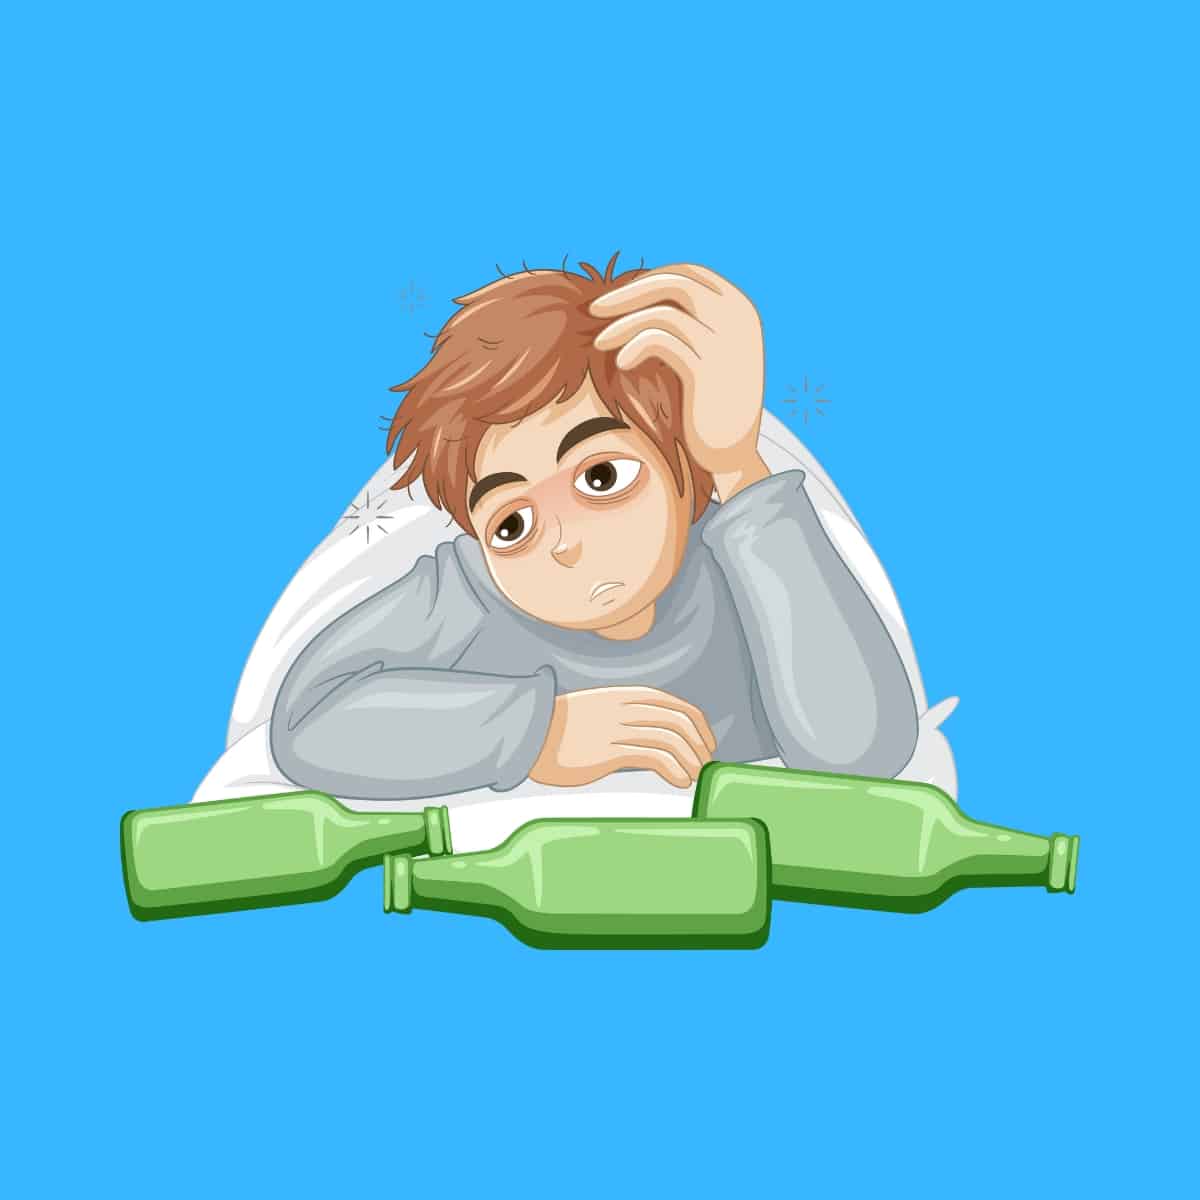 Cartoon graphic of a man in his bed with a hangover with 3 empty alcohol bottles lying near him on a blue background.